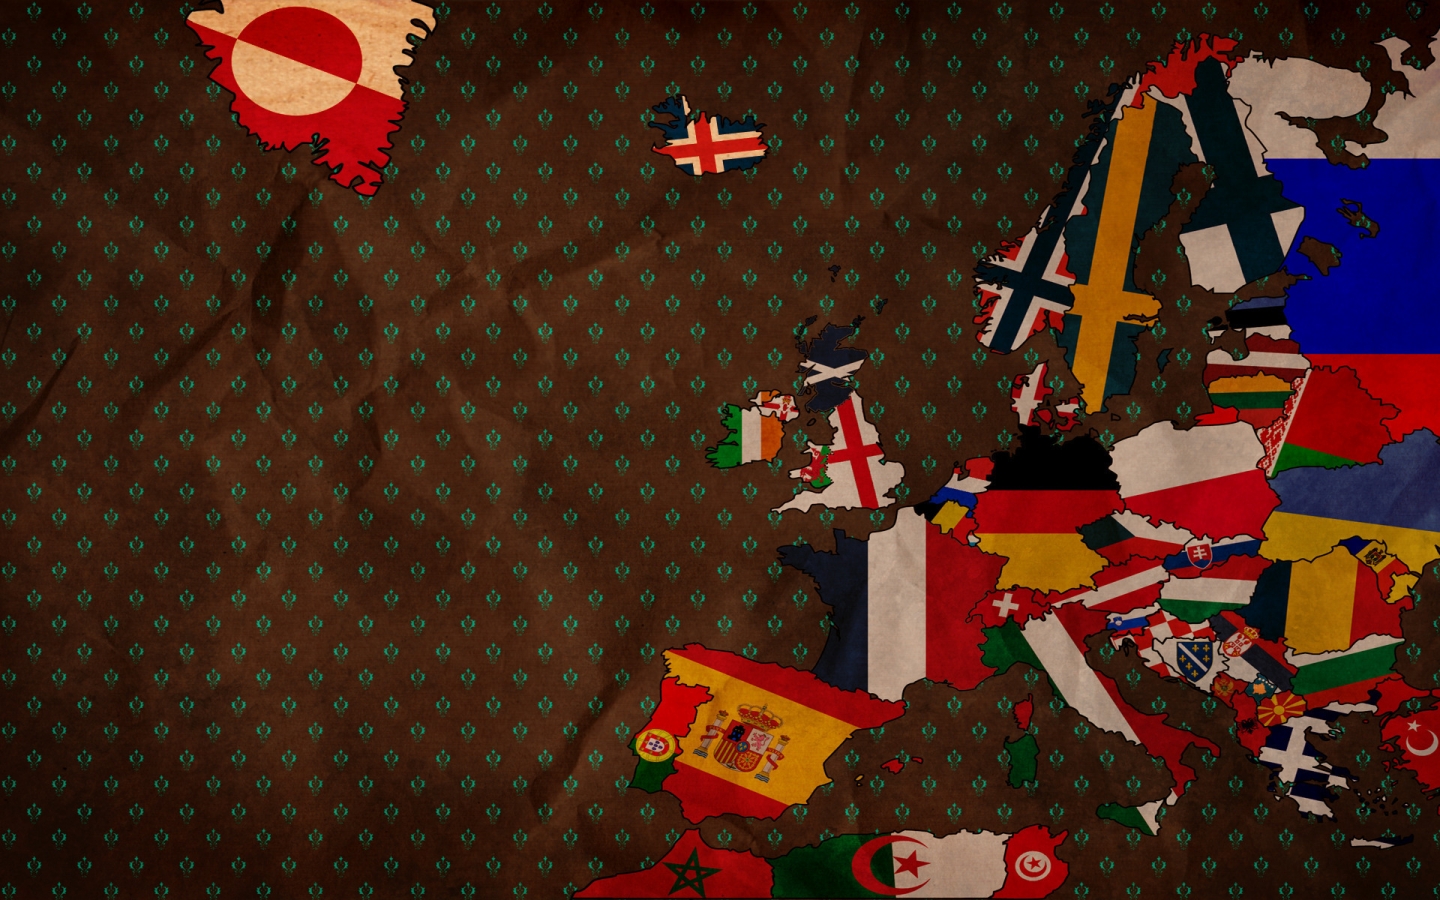 Bits of Flags for 1440 x 900 widescreen resolution